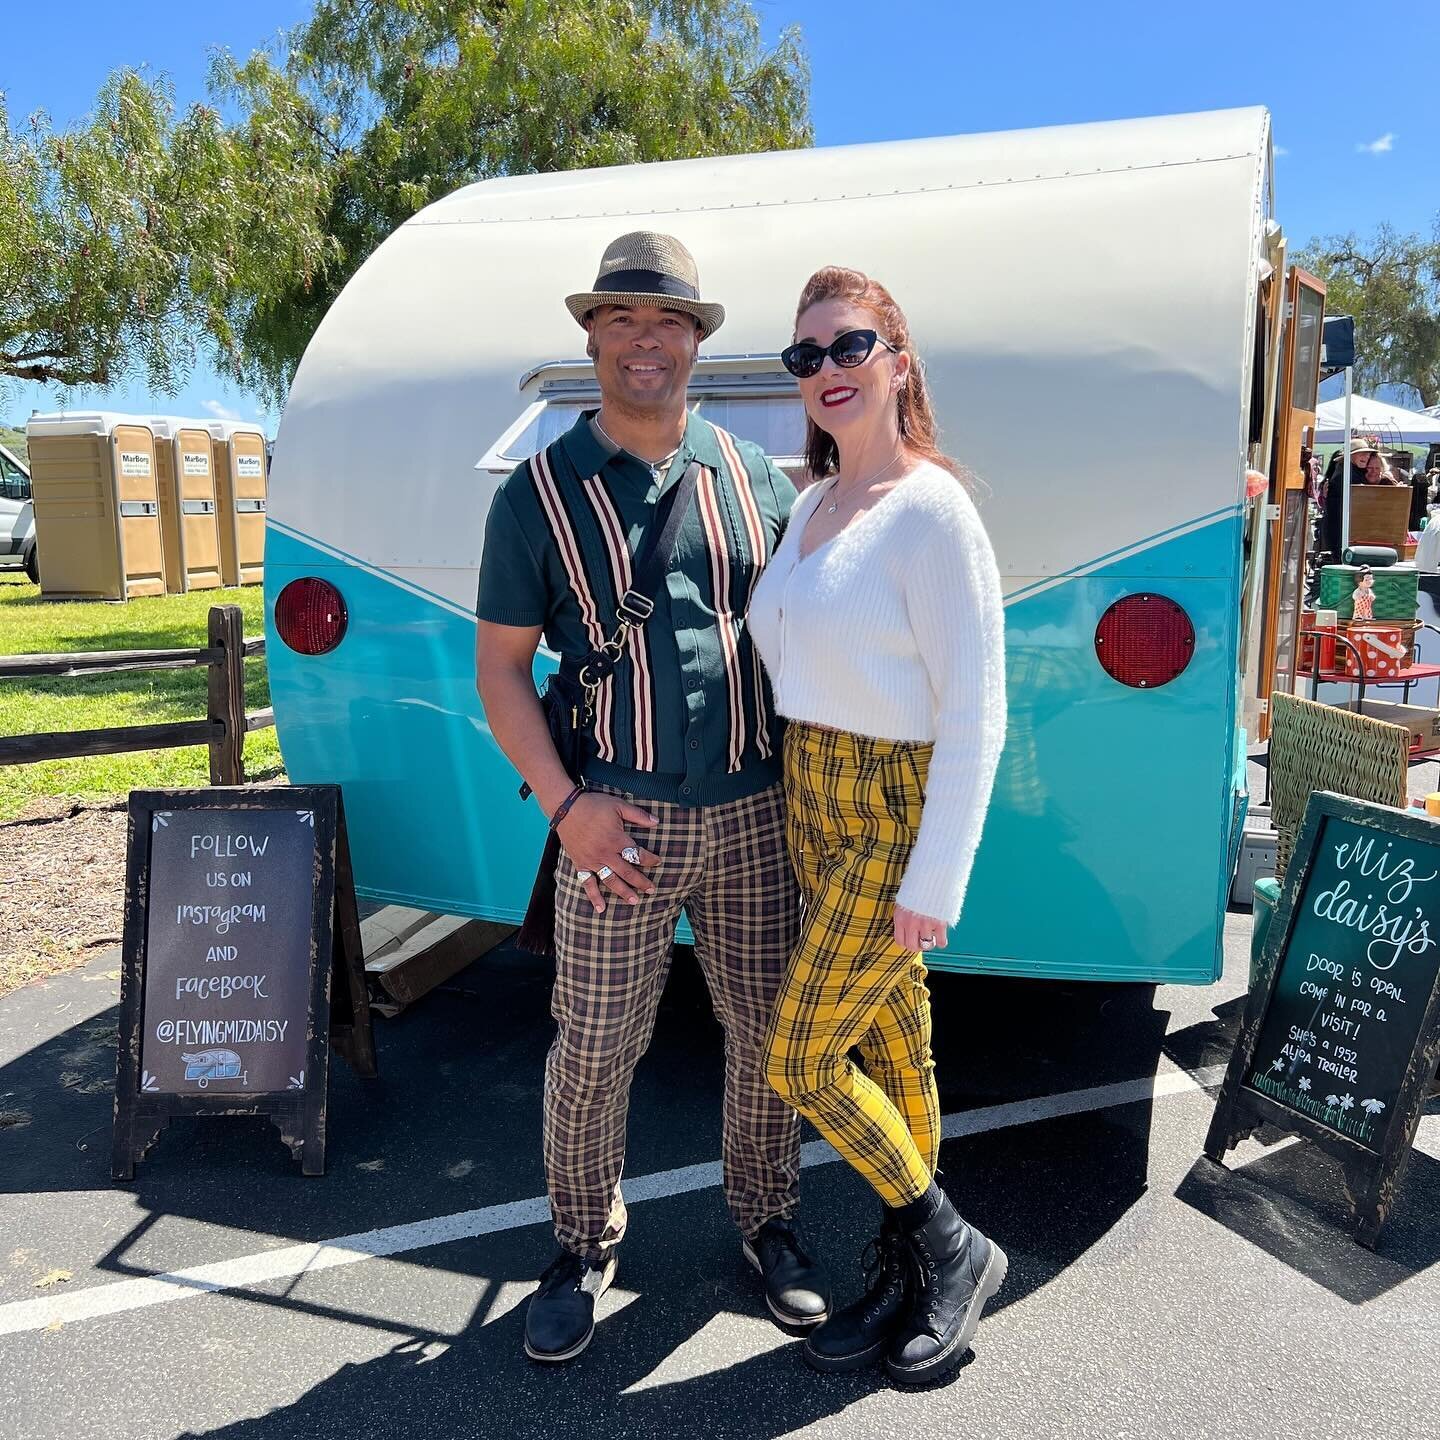 🌟 So much GRATITUDE!!🌟
THANK YOU to all the amazing vendors and fabulous customers who made yesterday&rsquo;s Vintage Popup Market at the stunning Mission Santa Ines in Solvang, an unforgettable success!! Your support and enthusiasm brought so much